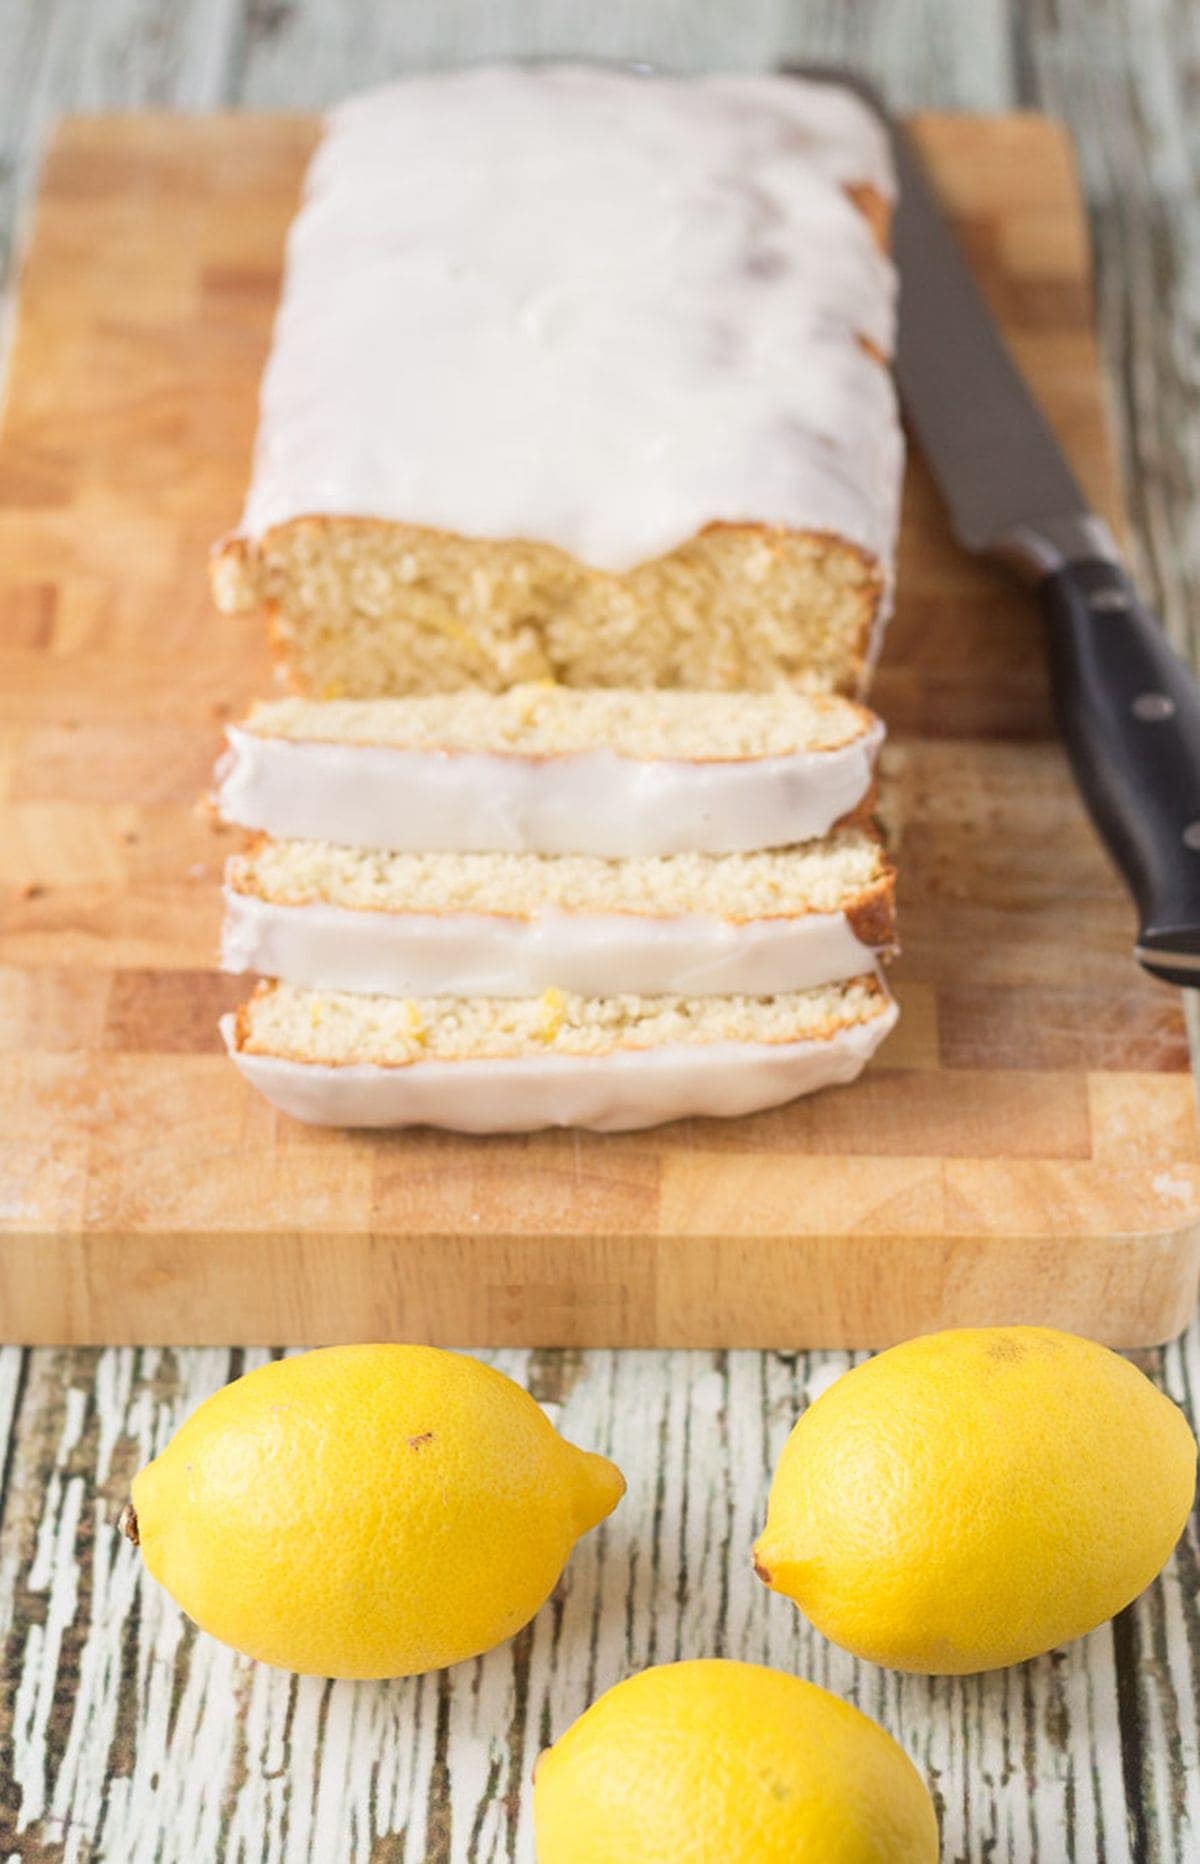 A lighter lemon loaf cake on a chopping board facing forward with three slices cut off. Three lemons in front as decoaration and a carving knife to the left hand side.